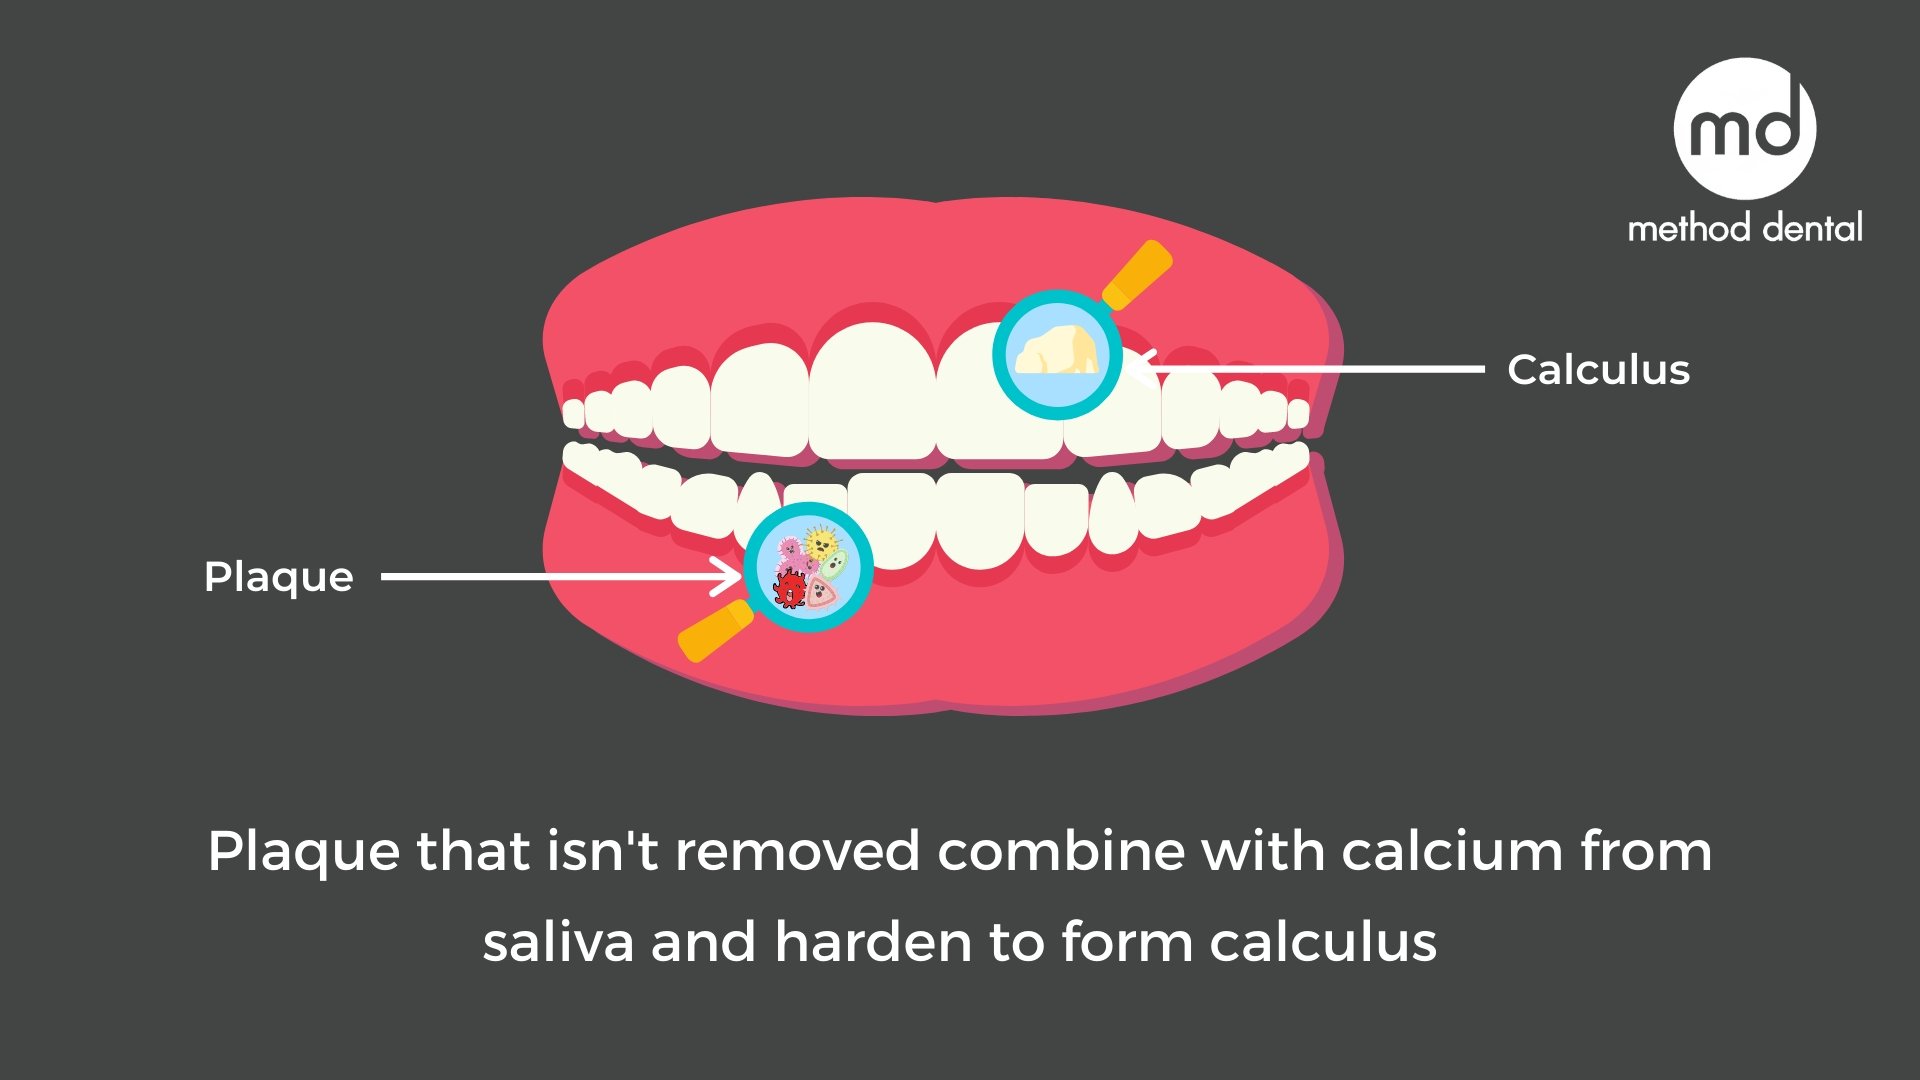 Bacteria and saliva combining to form dental calculus on teeth.